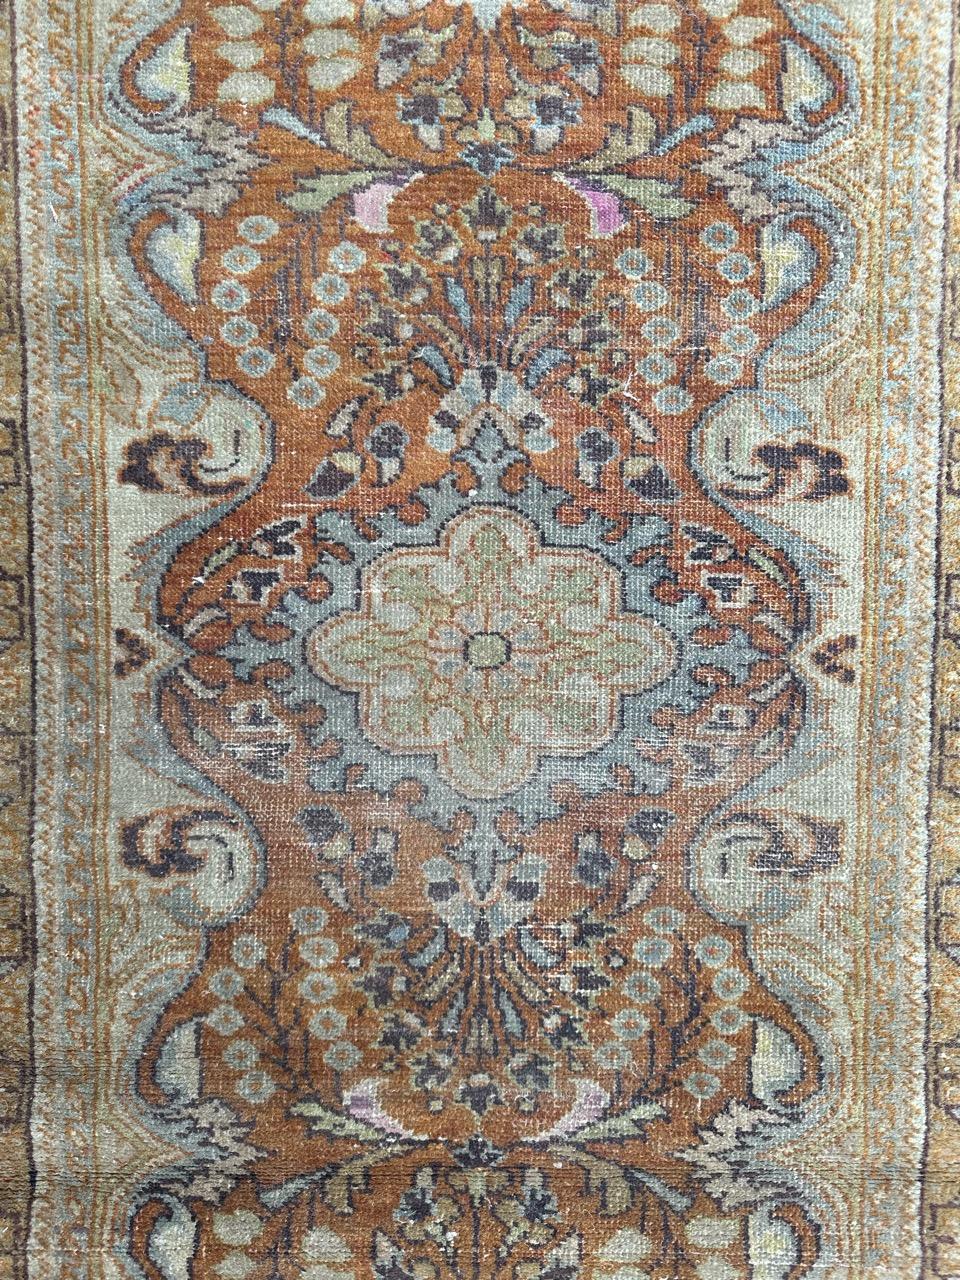 Pretty late 19th century tabriz rug with nice Persian design and beautiful natural colors, entirely and finely hand knotted with wool velvet on cotton foundation.

✨✨✨
